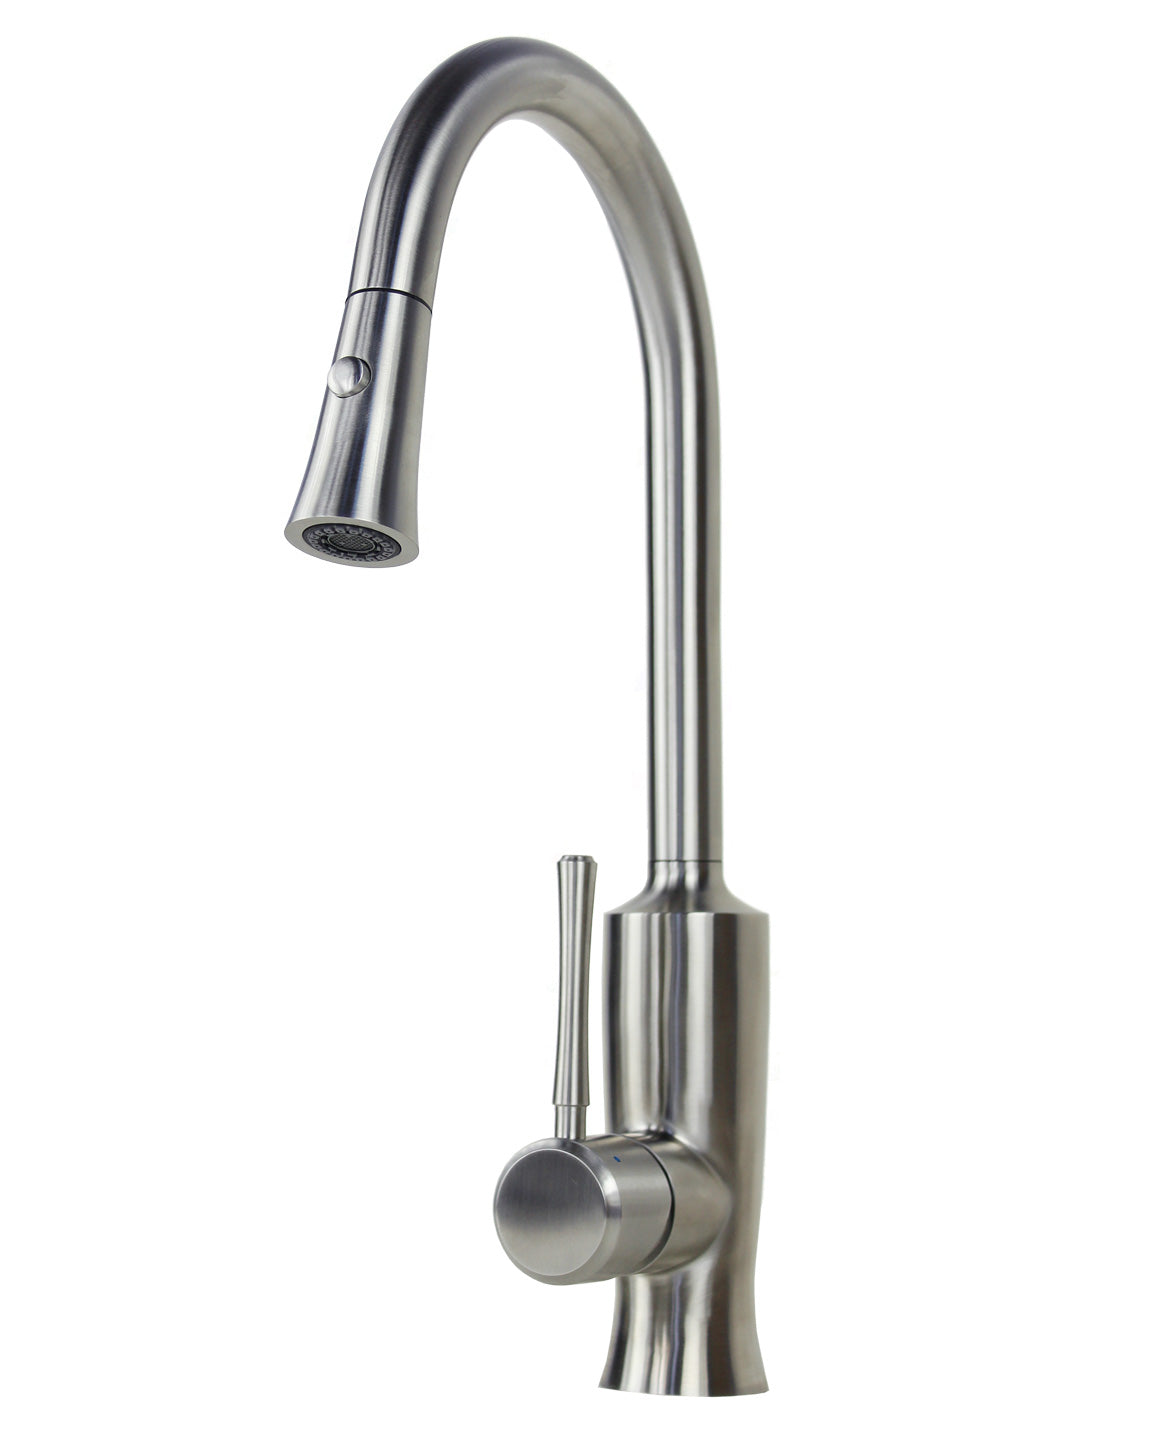 Venus Stainless Steel Lead Free Pull Out Sprayer Kitchen Faucet